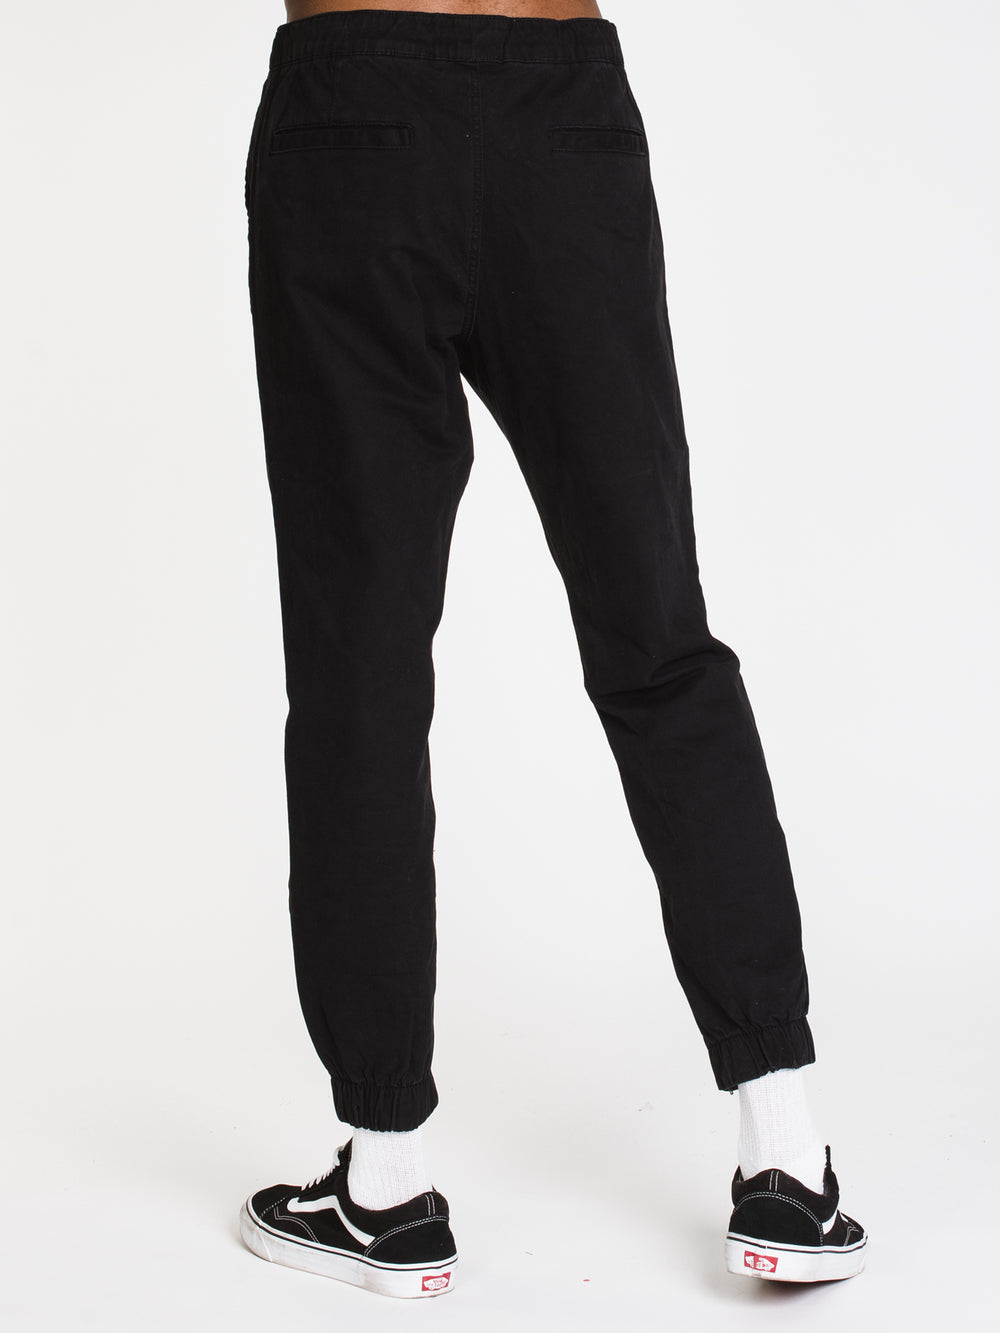 TAINTED CROCKETT RUGBY JOGGER - BLACK